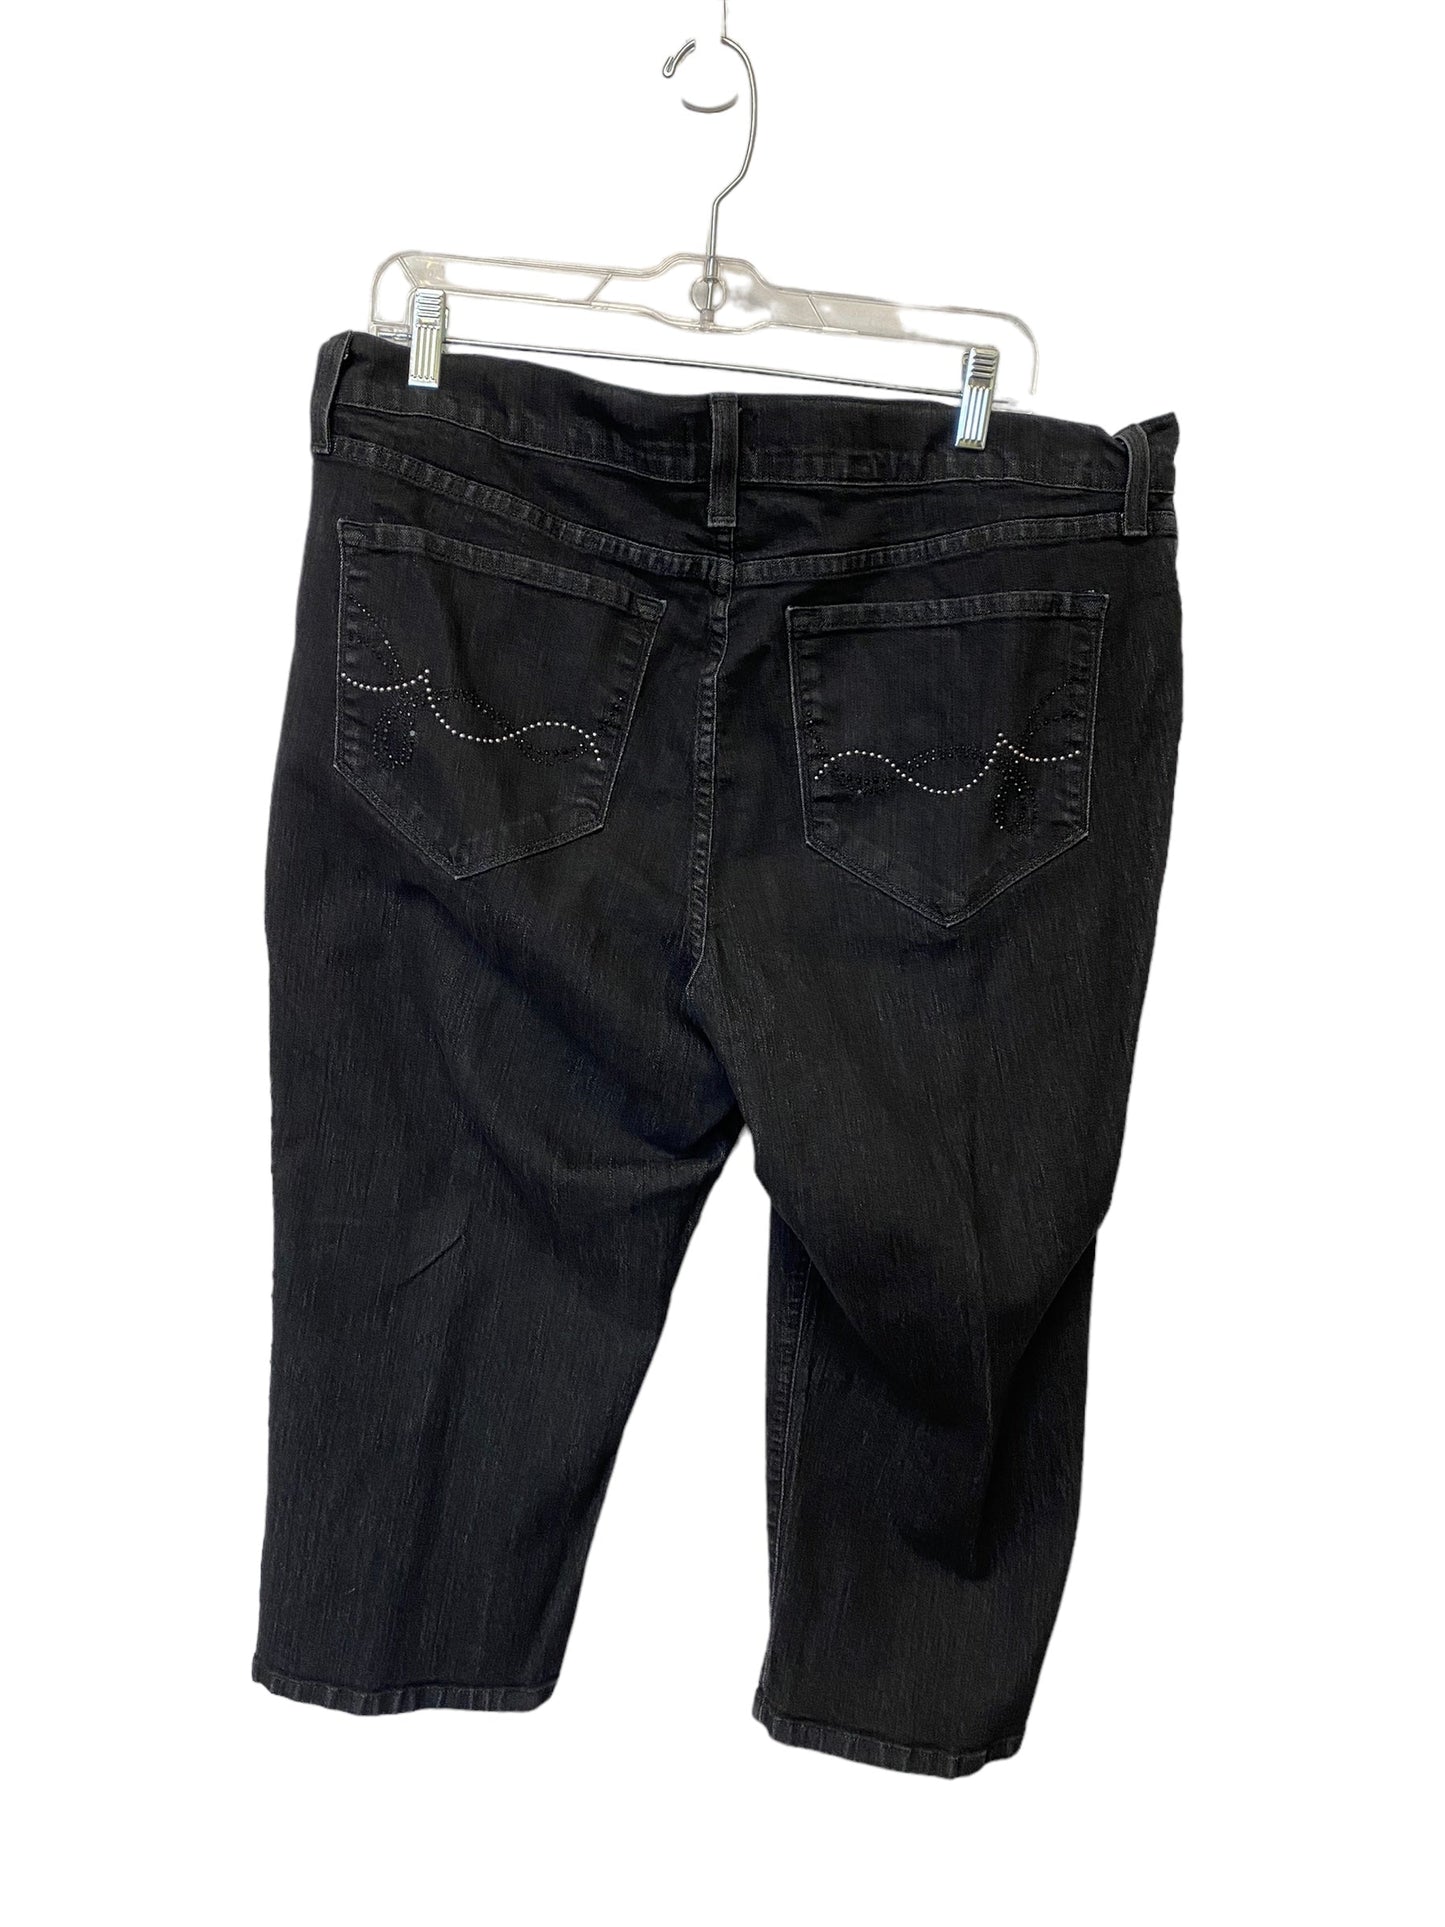 Capris By Clothes Mentor  Size: 16